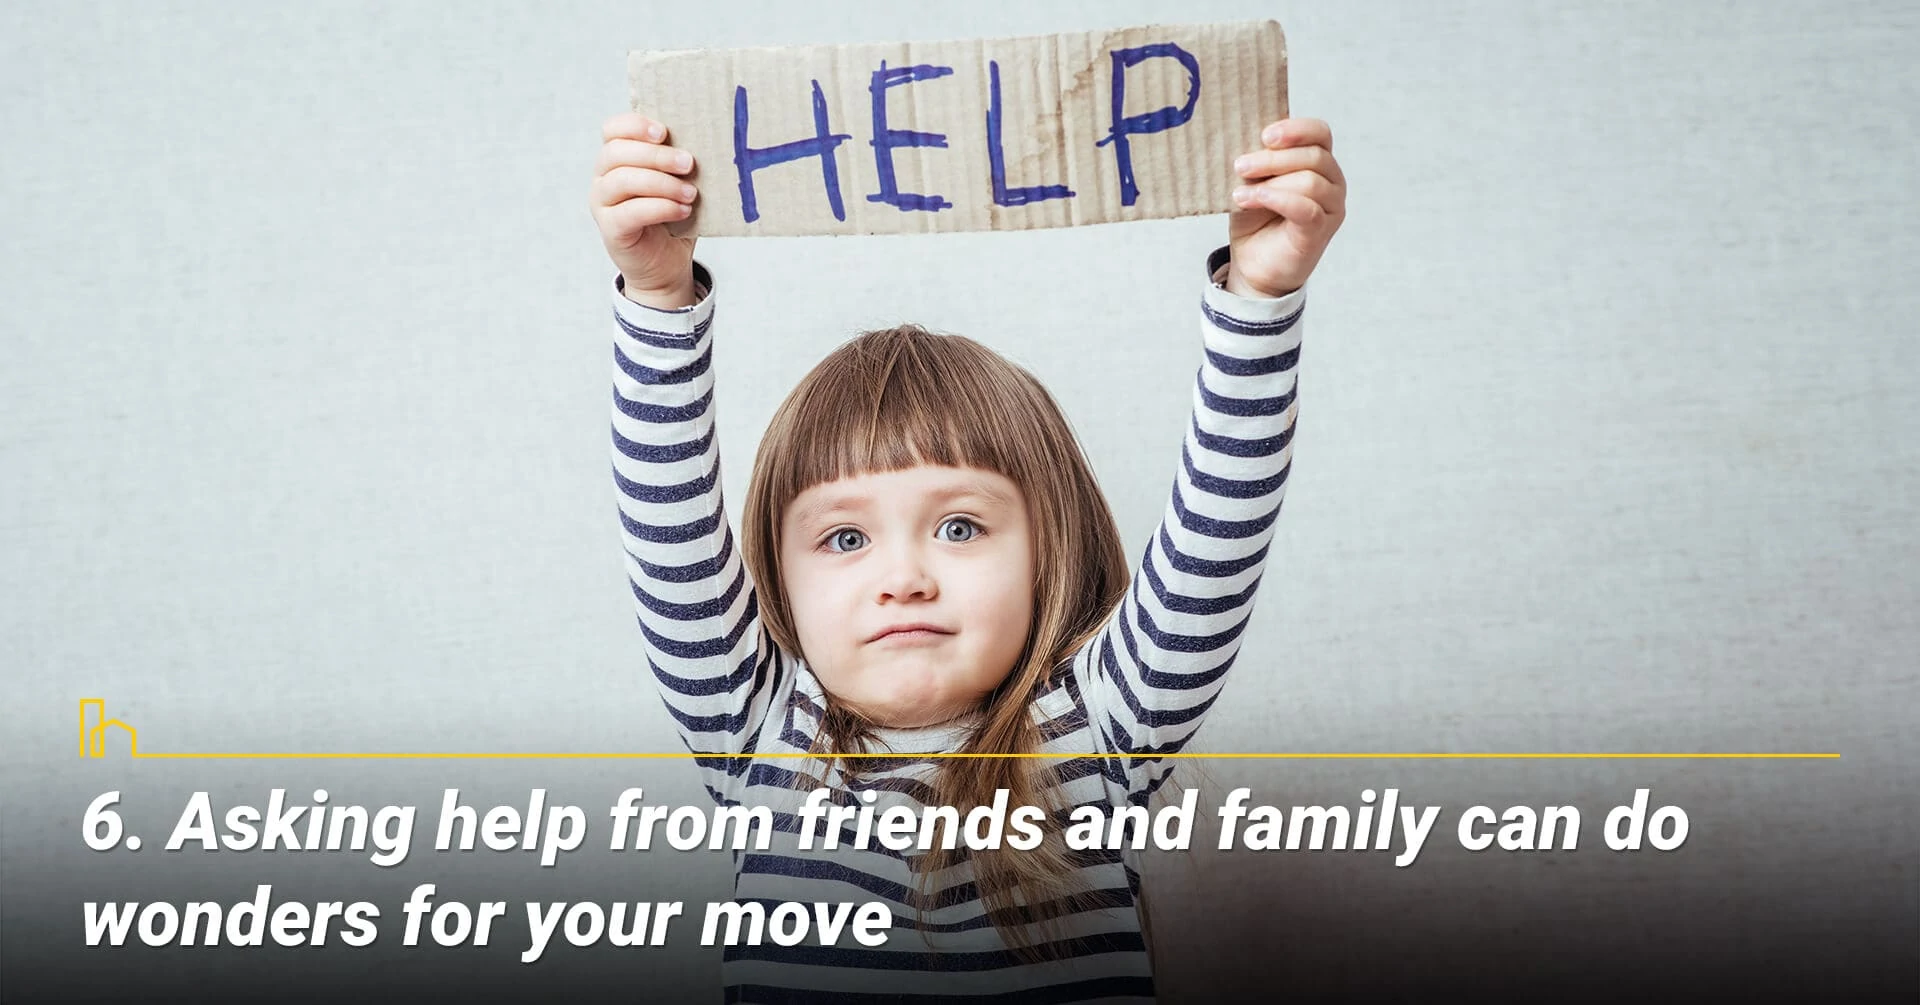 Asking help from friends and family can do wonders for your move, get help from family and friends